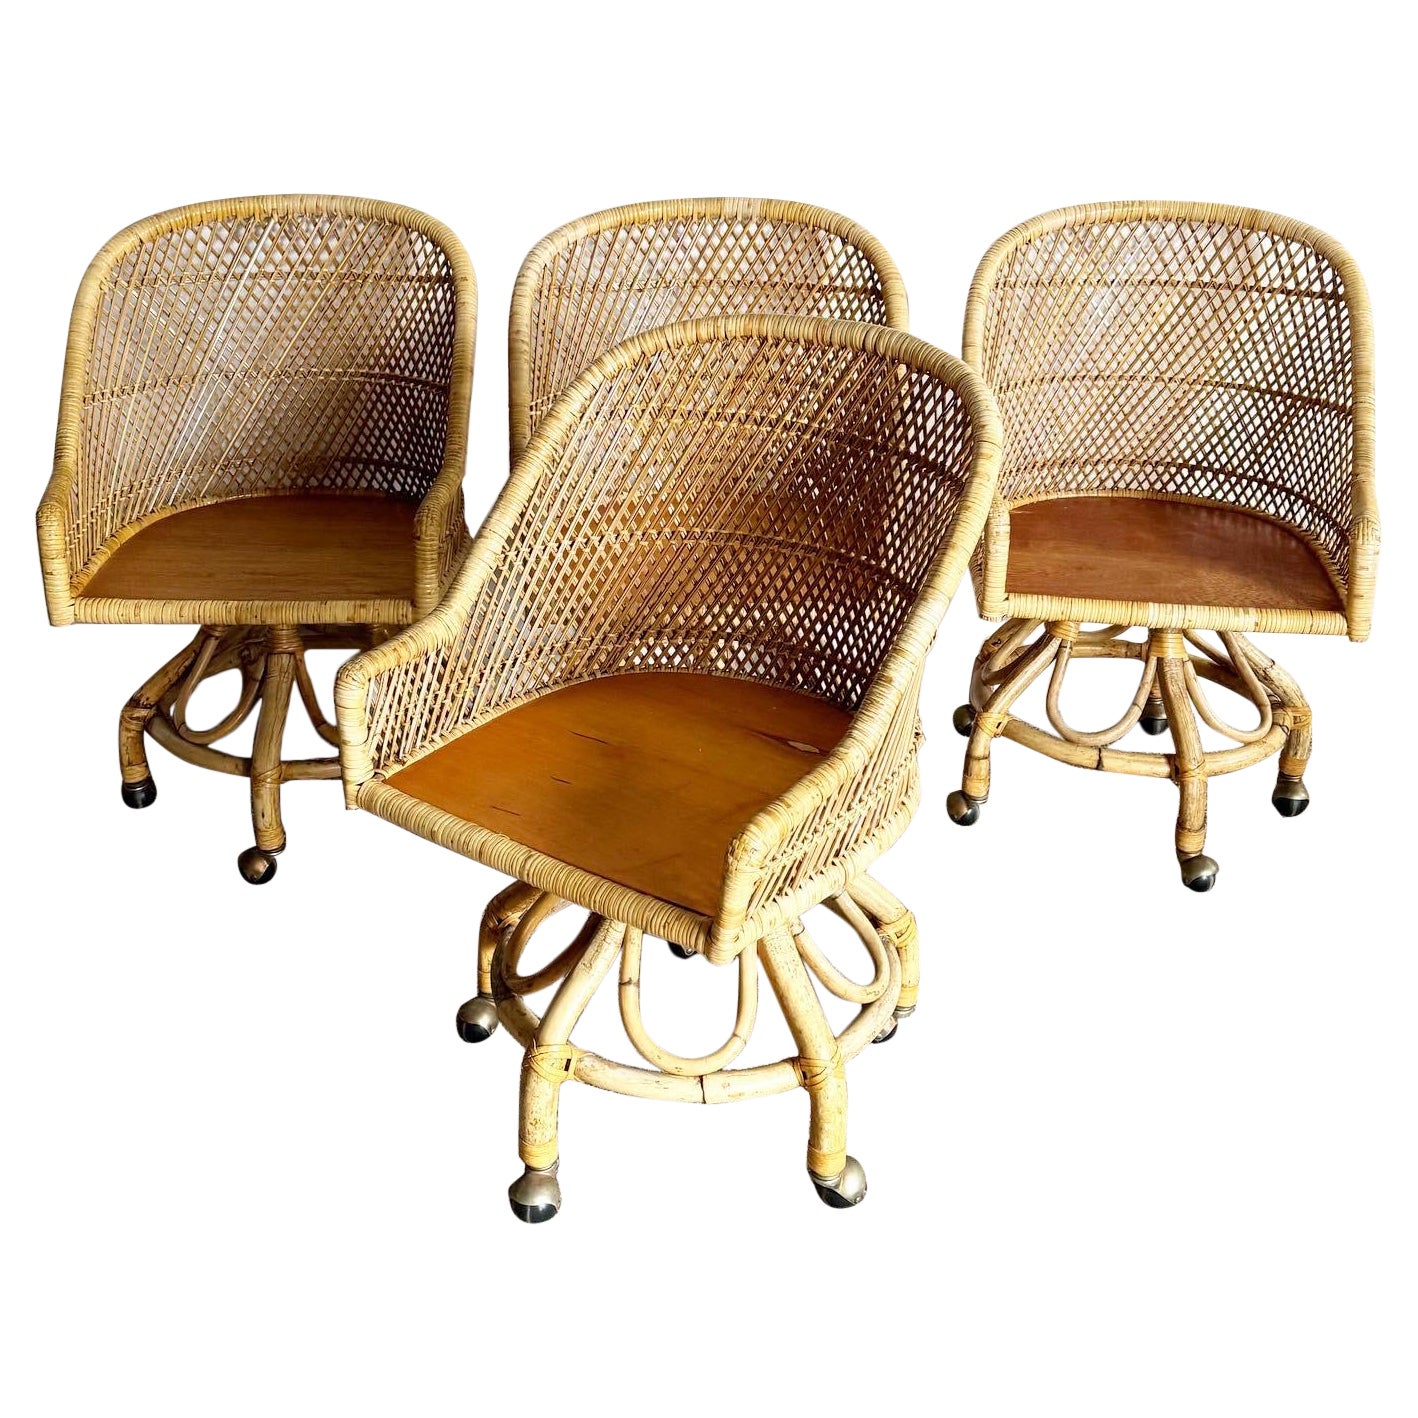 Boho Chic Buri Rattan Bamboo Swivel Barrel Dining Chairs on Casters - Set of 4 For Sale